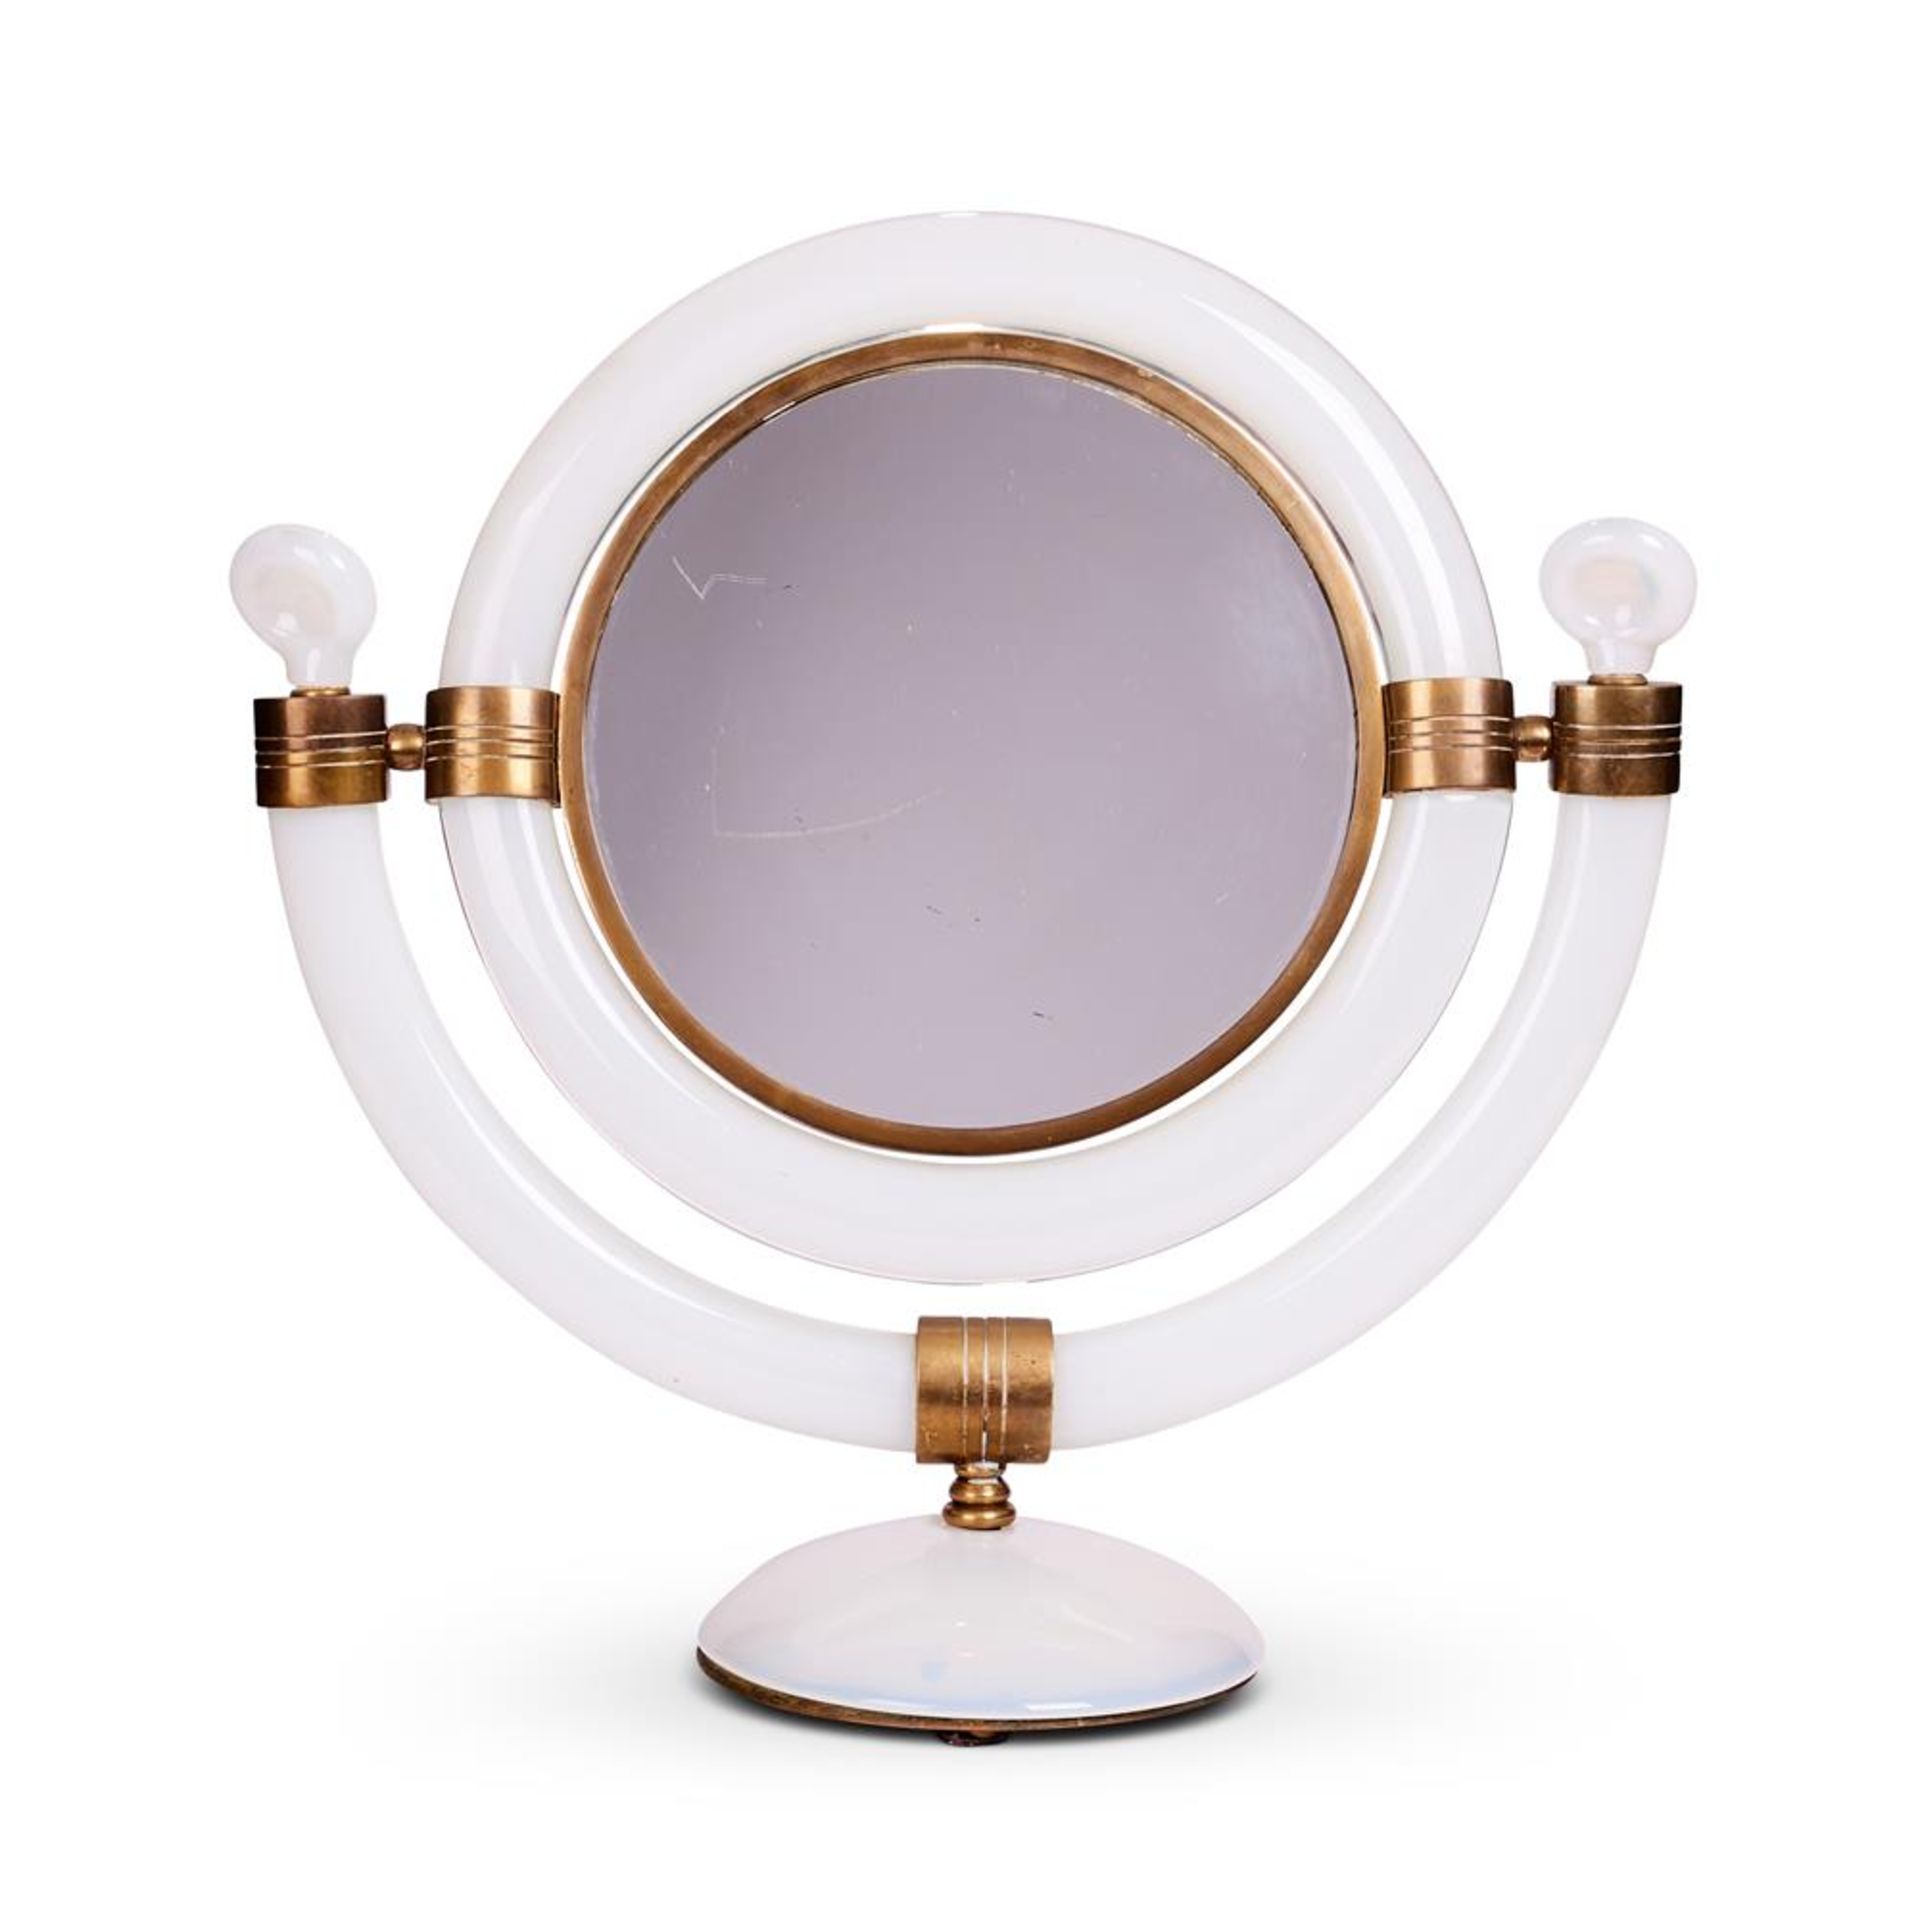 AN ITALIAN WHITE OPALESCENT GLASS AND BRASS MOUNTED DRESSING MIRRORBY SEGUSO, CIRCA 1955